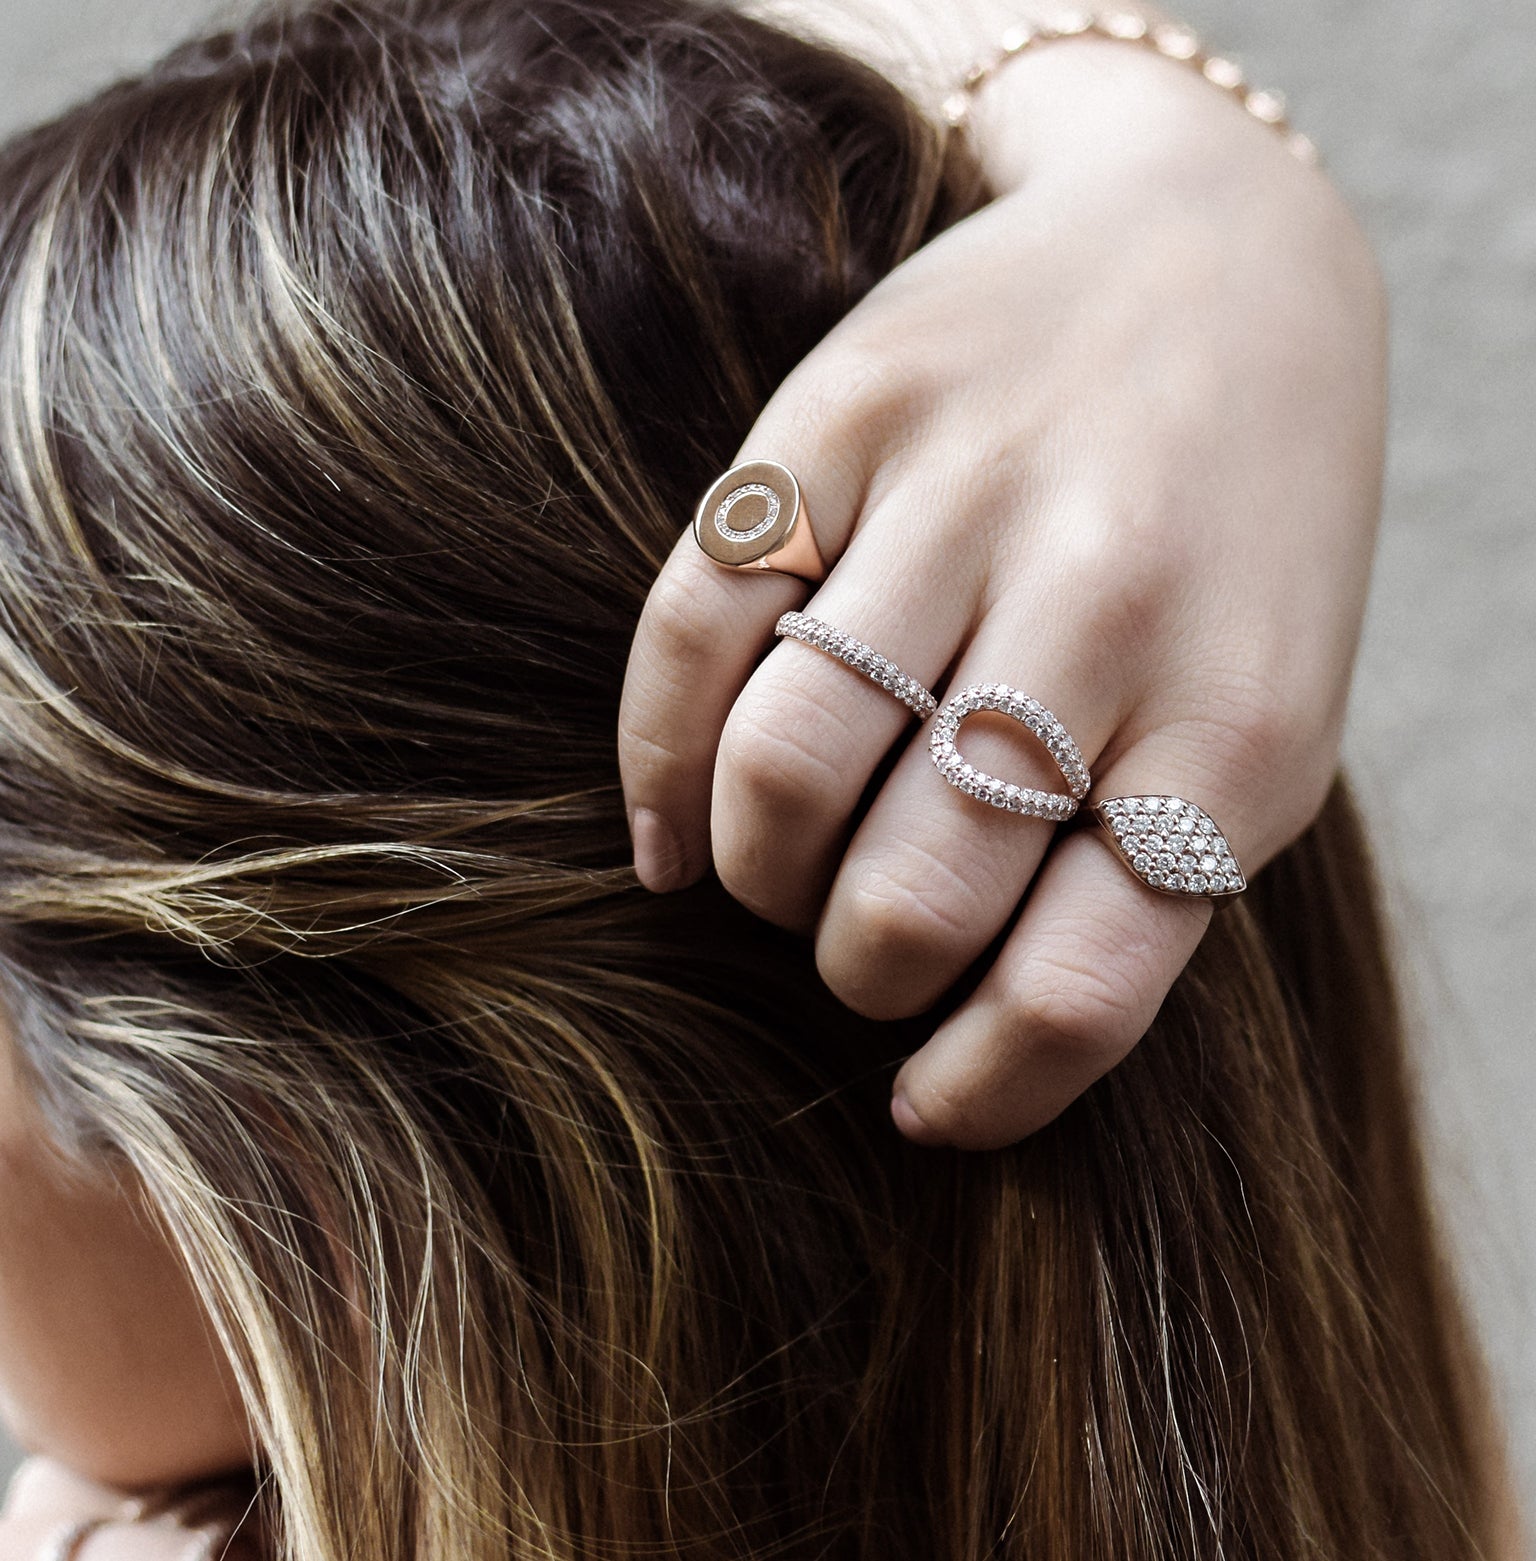 Athena Ring shown with the Gemma Ring on the pointer and Mini Chilla Ring on the pinky.